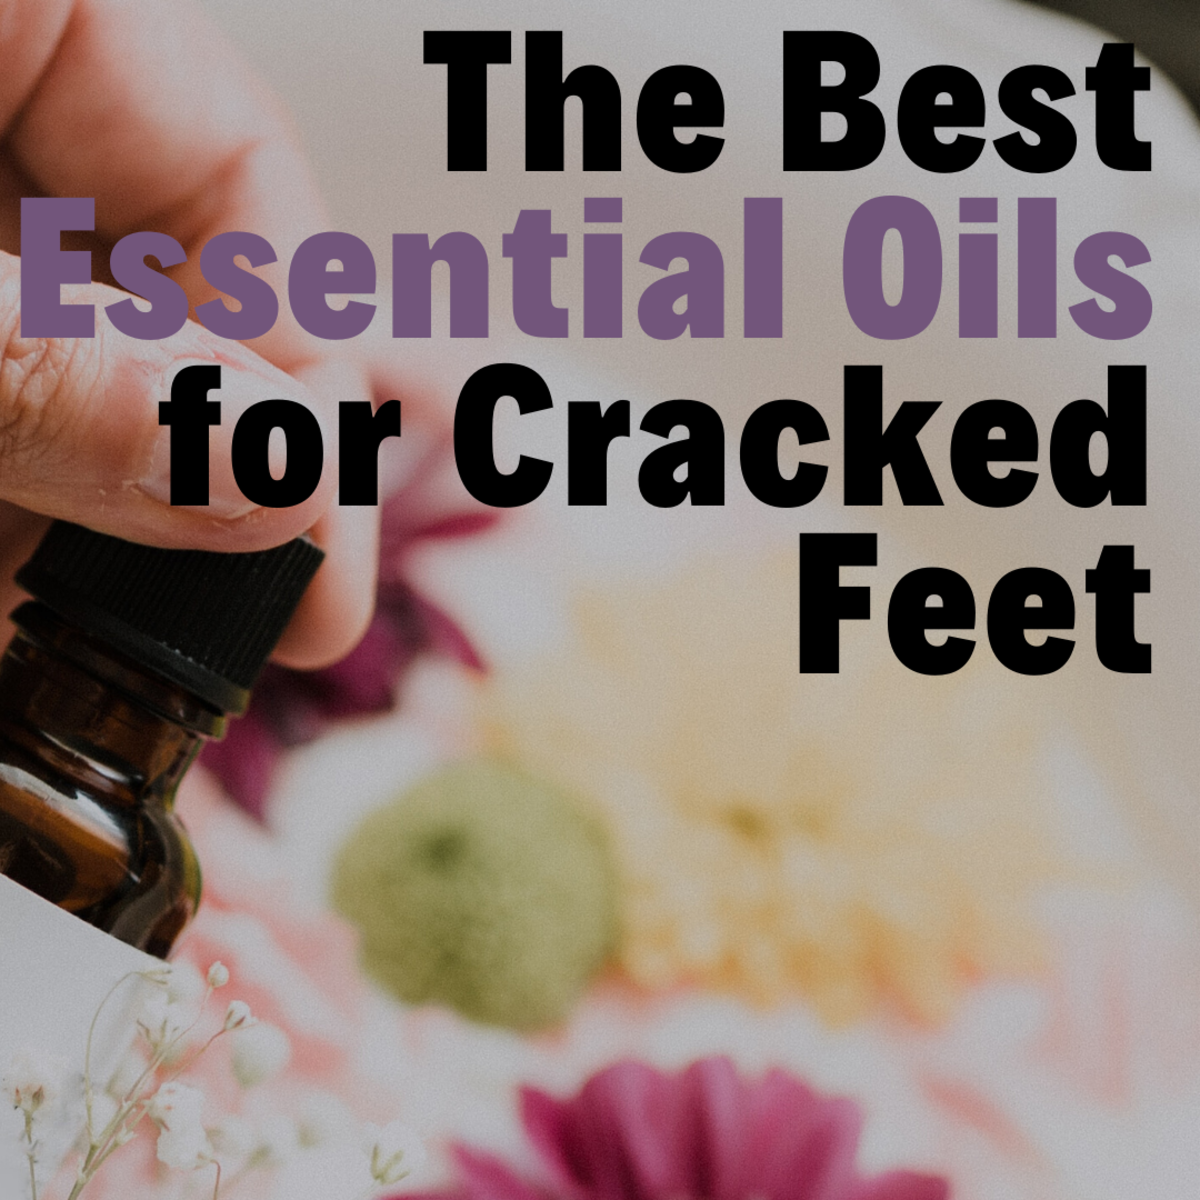 How to heal cracked feet naturally by using essential oils.